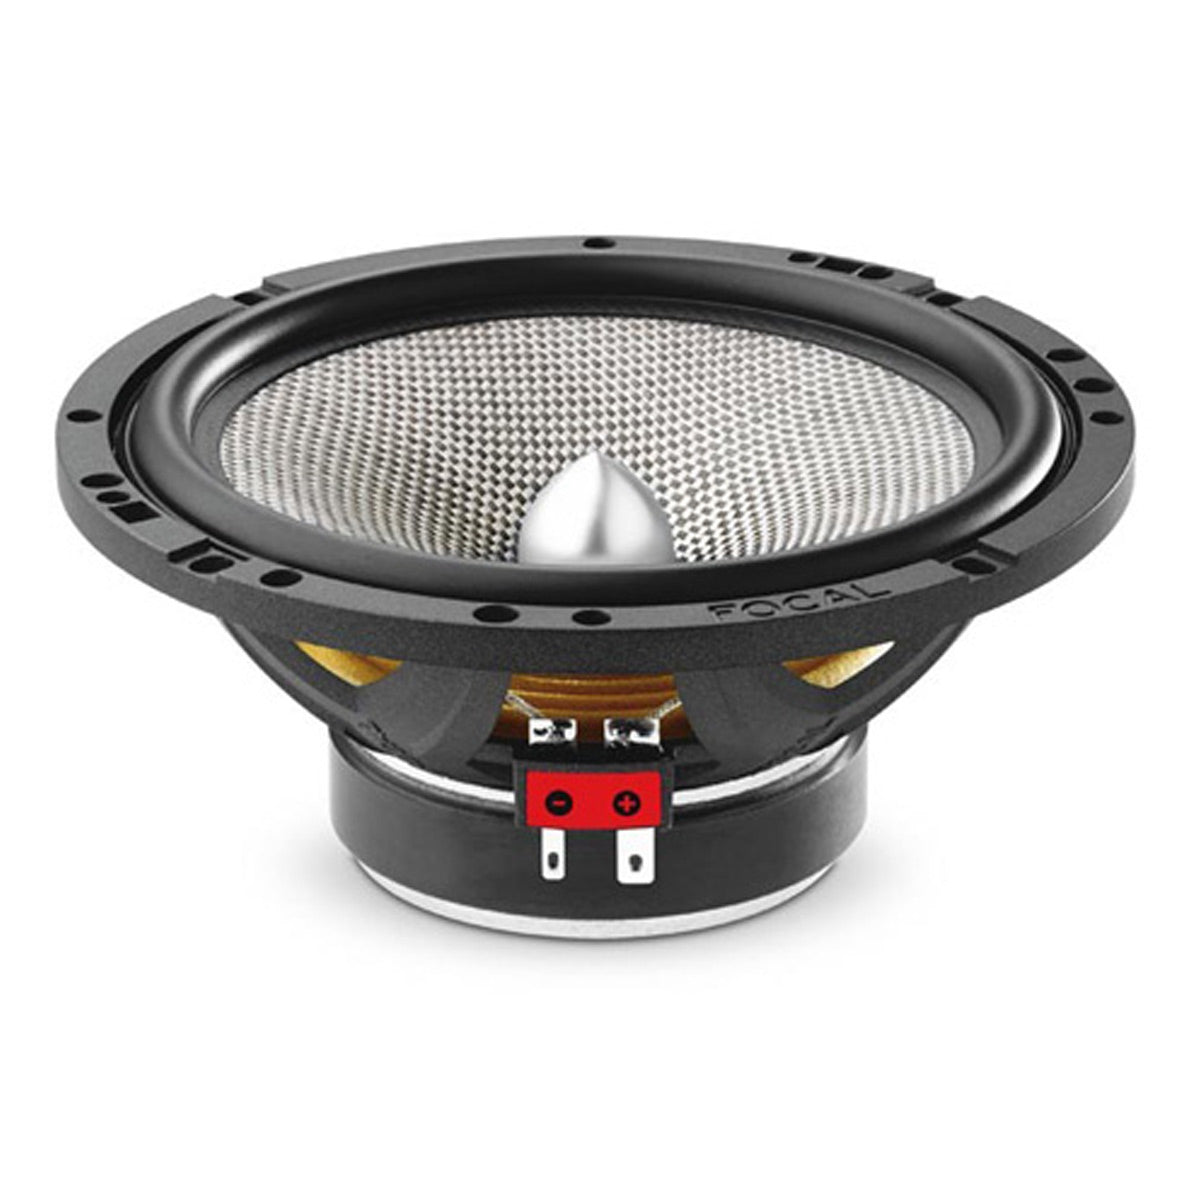 Focal 165 AS Access 6-1/2" 2-Way Component Speakers